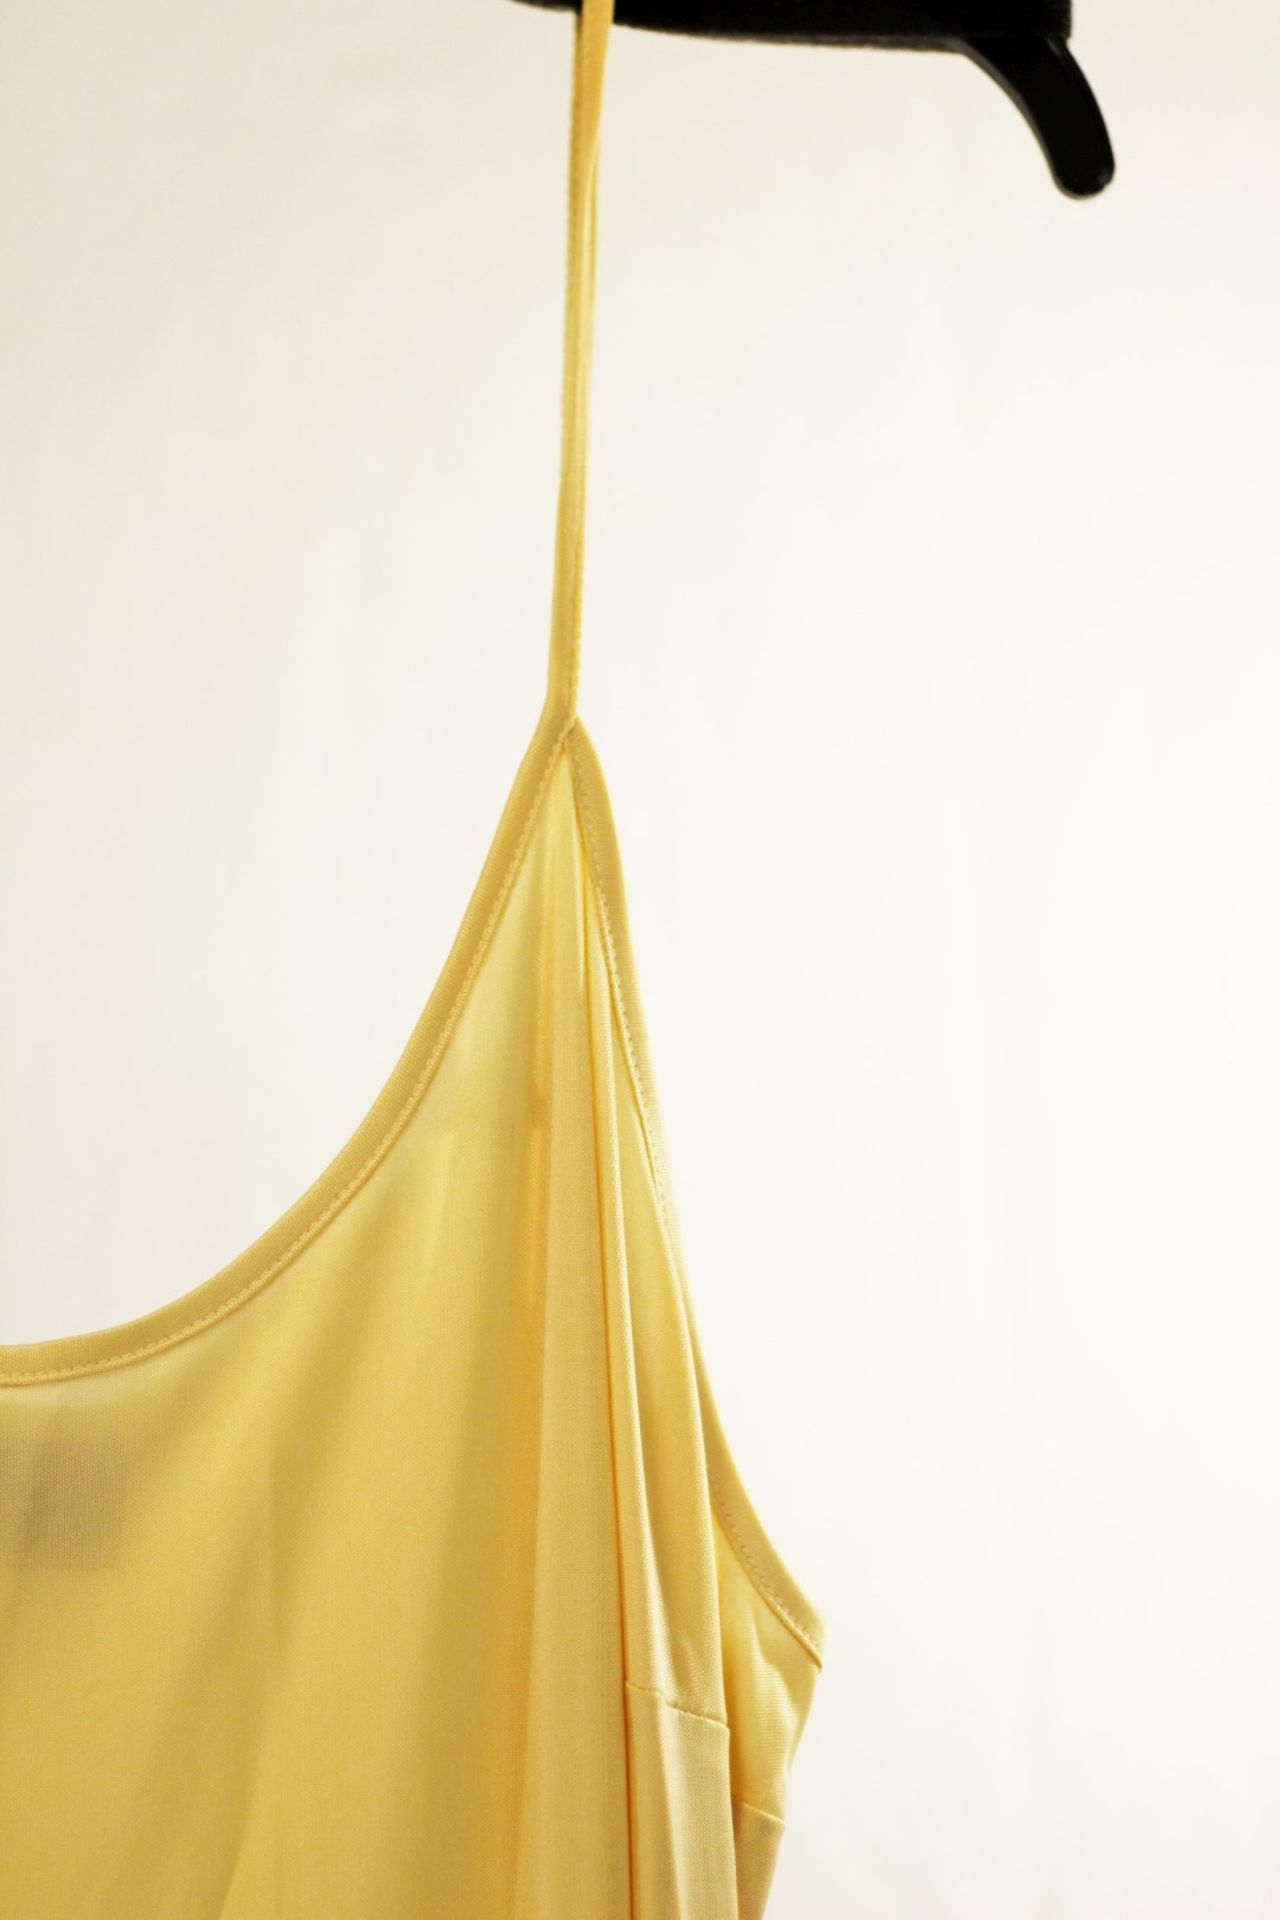 1 x Fendi Champagne Slip Dress - Size: XL - Material: Acetate - From a High End Clothing Boutique - Image 2 of 2